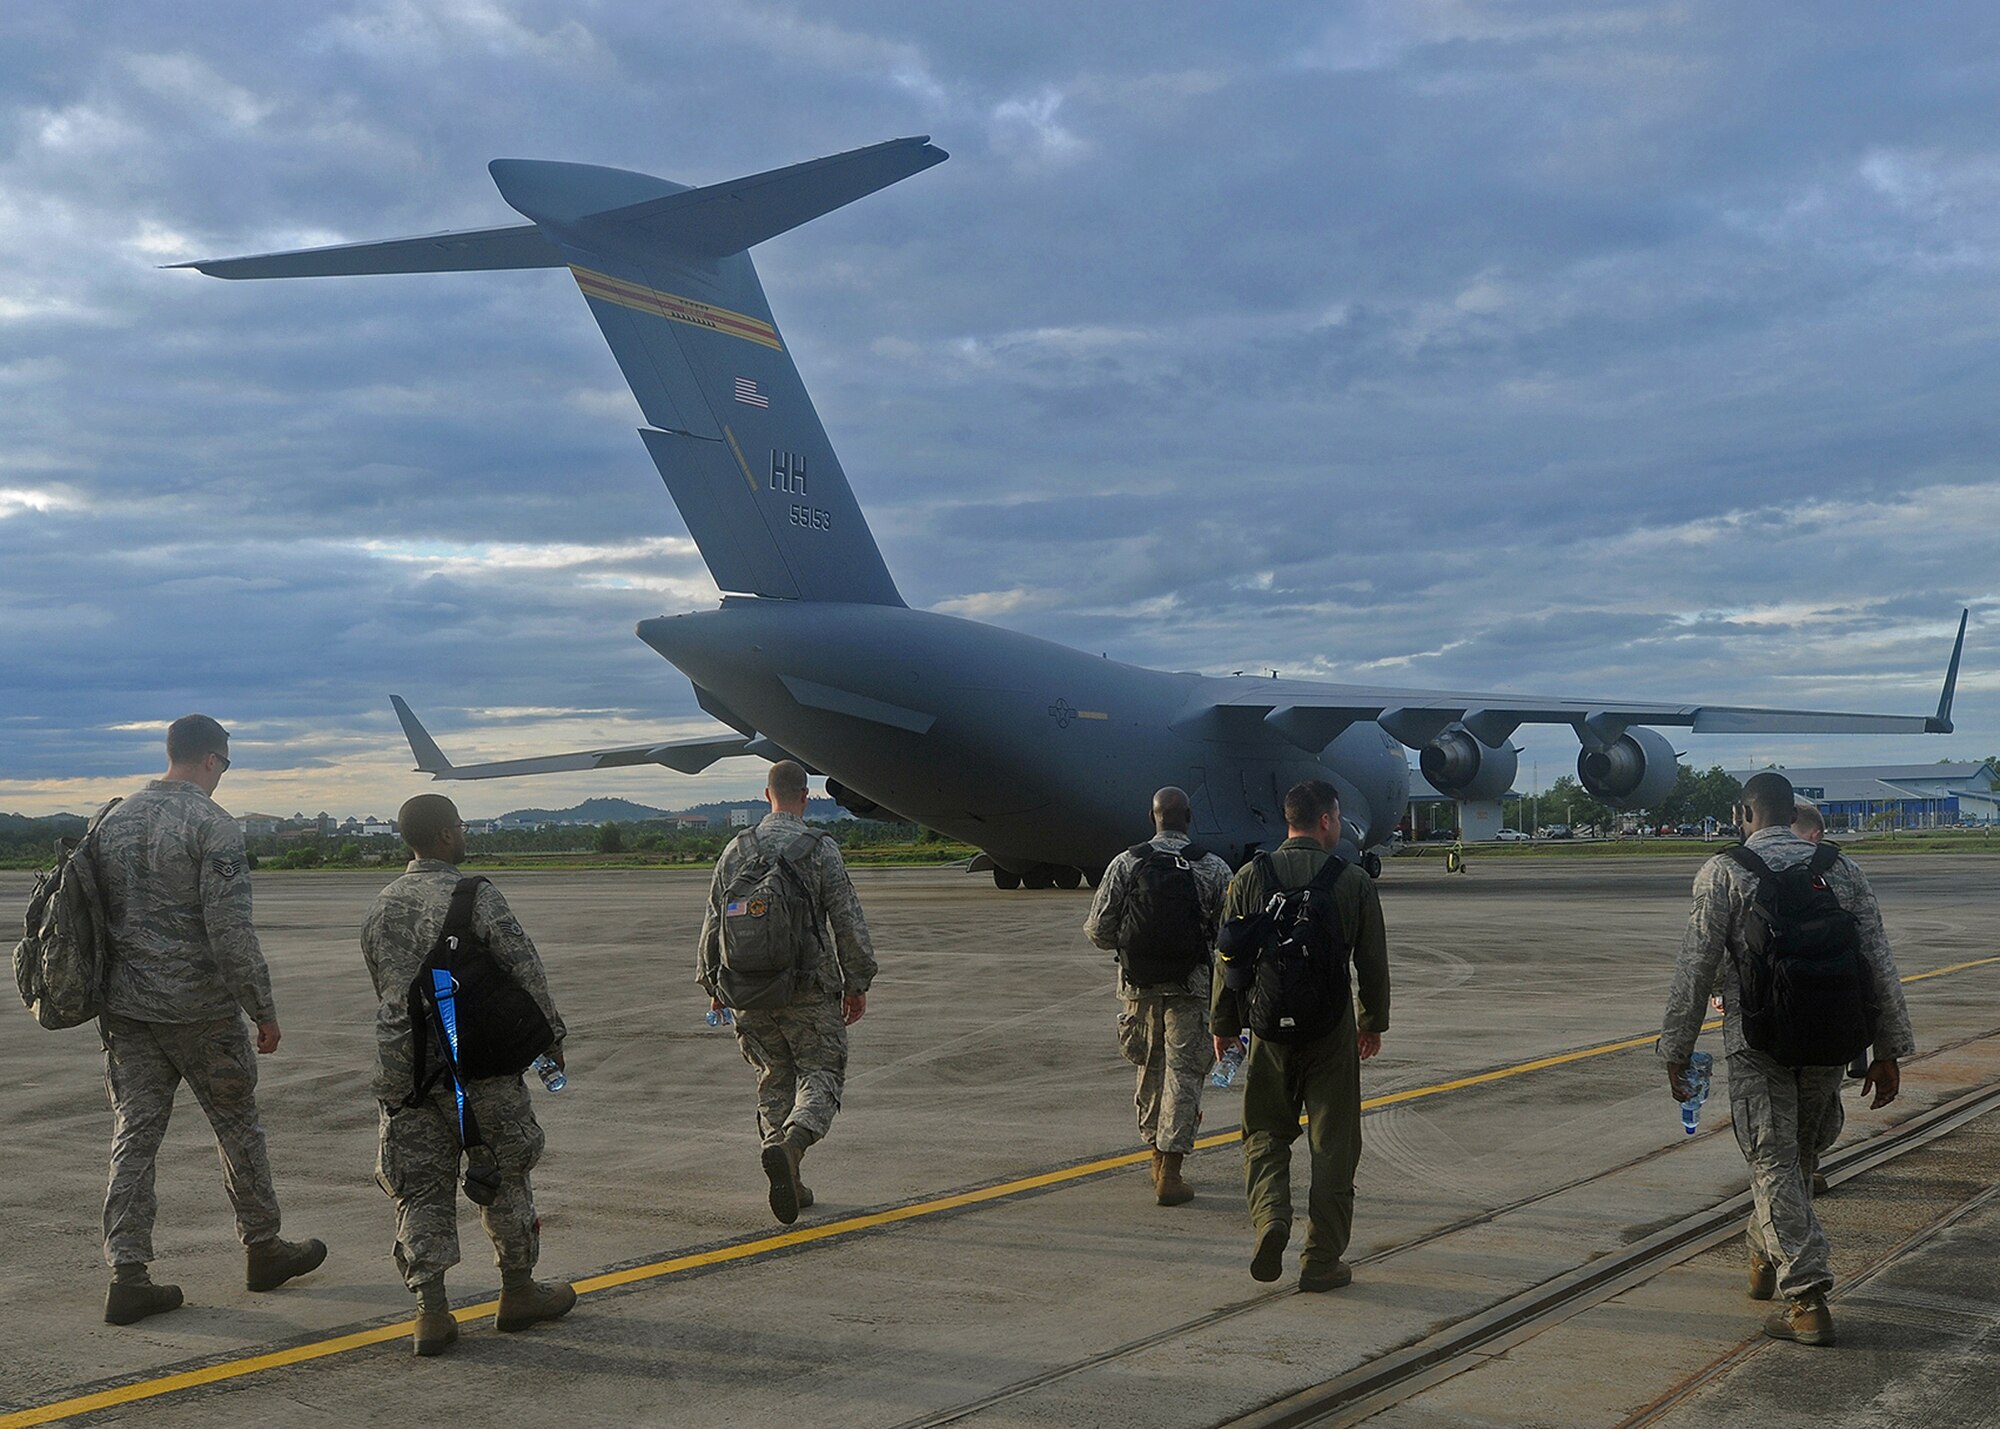 Joint Base Pearl Harbor-Hickam Airmen from the 535th Airlift Squadron prepare to board a C-17 Globemaster III at Rimba Air Base during the 4th Biennial Brunei Darussalam International Defense Exhibition, Dec. 1, 2013. JBPPH personnel will be showcasing the C-17 through static displays and aerial demonstrations during BRIDEX. The exhibition is an opportunity for networking and sharing technology with regional partners and allies, building strong multilateral relationships, increased cooperation and enhanced preparedness for disasters and other contingency operations. (U.S. Air Force photo/Master Sgt. Jerome S. Tayborn)